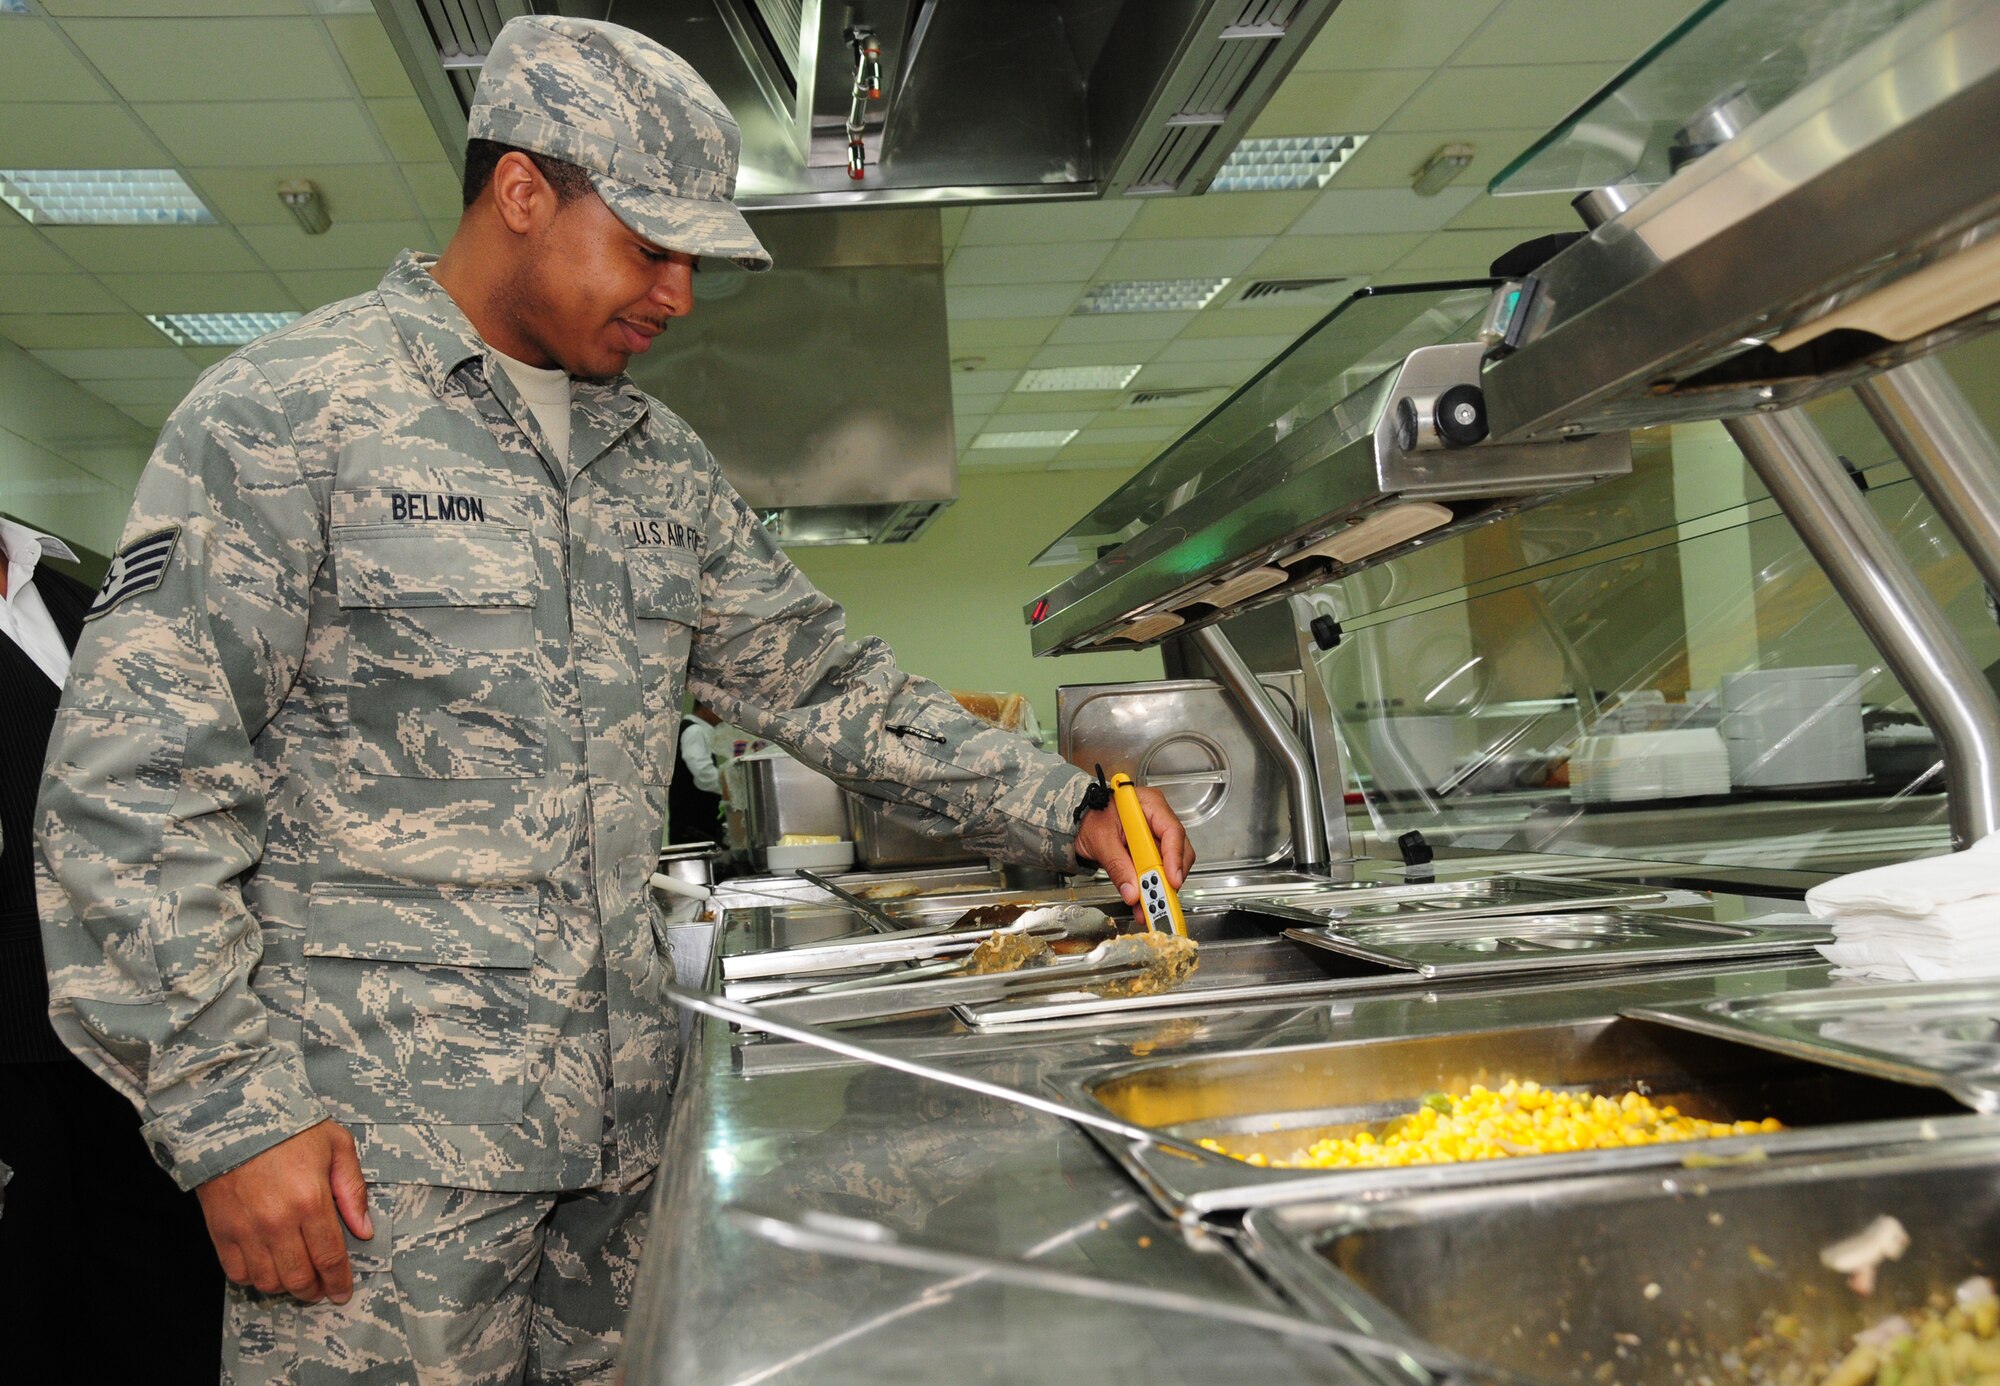 U.S. Air Force Staff Sgt. Morris Belmon, 386th Expeditionary Medical Group Public Health technician, checks the food temperature of a dish at the base dining facility March 3, 2010 at an air base in Southwest Asia. (U.S. Air Force photo by Staff Sgt. Lakisha Croley/Released)